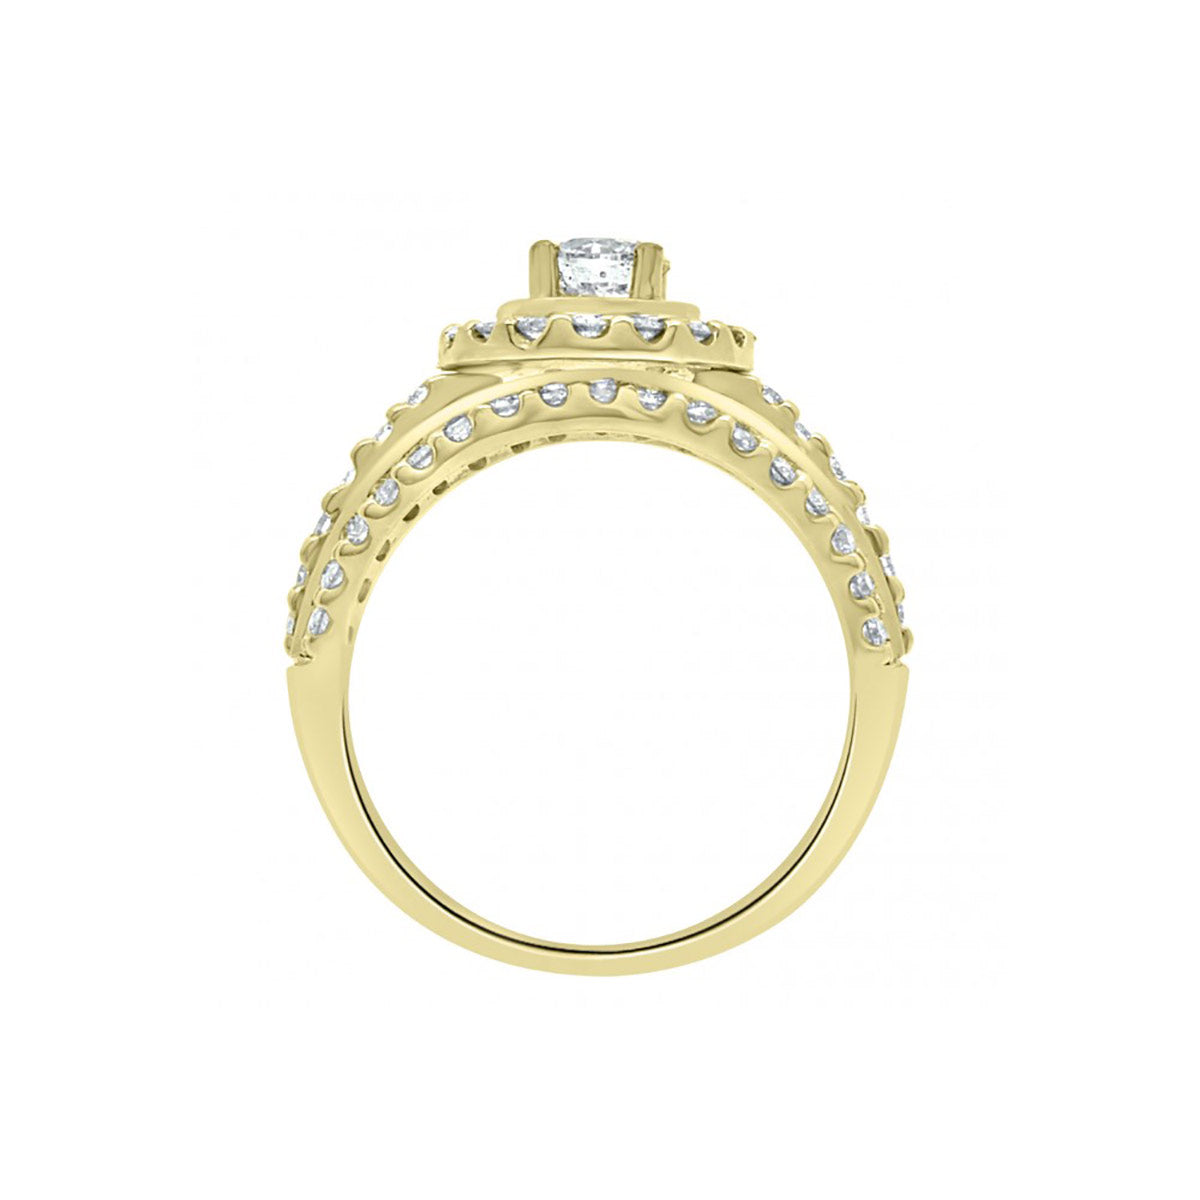 Three Band Engagement Ring in yellow gold in an upright vertical position